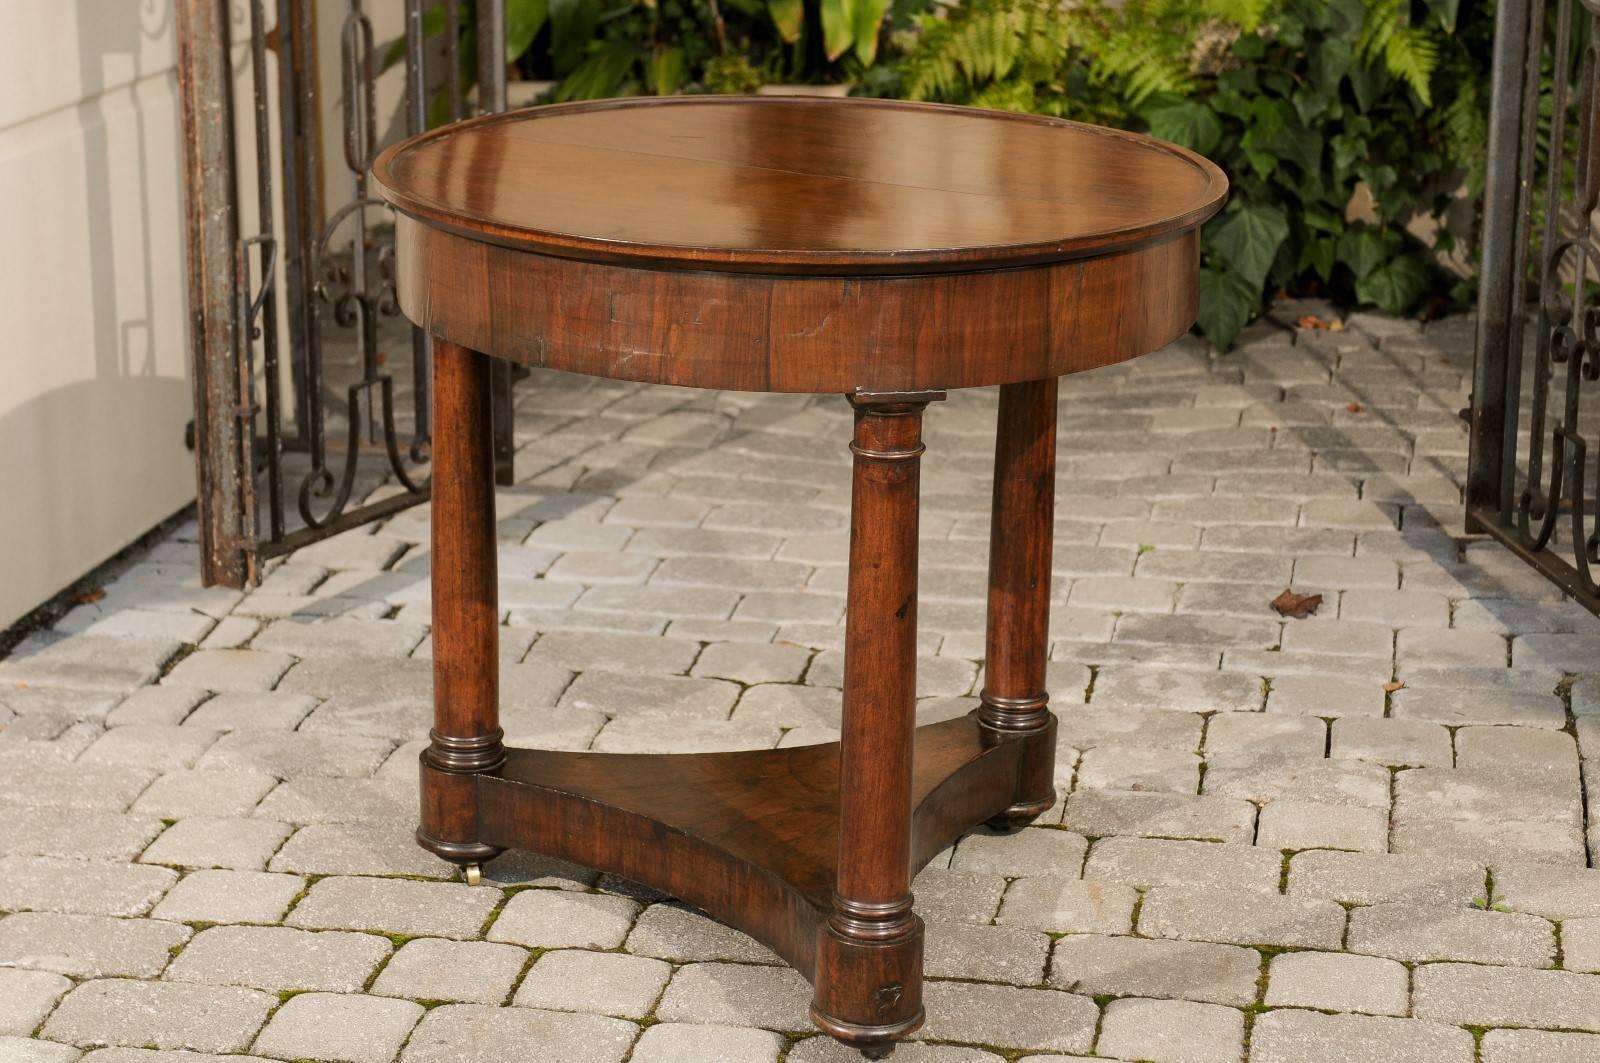 French 1870s Empire Style Walnut Round Center Table with Column-Shaped Legs 4